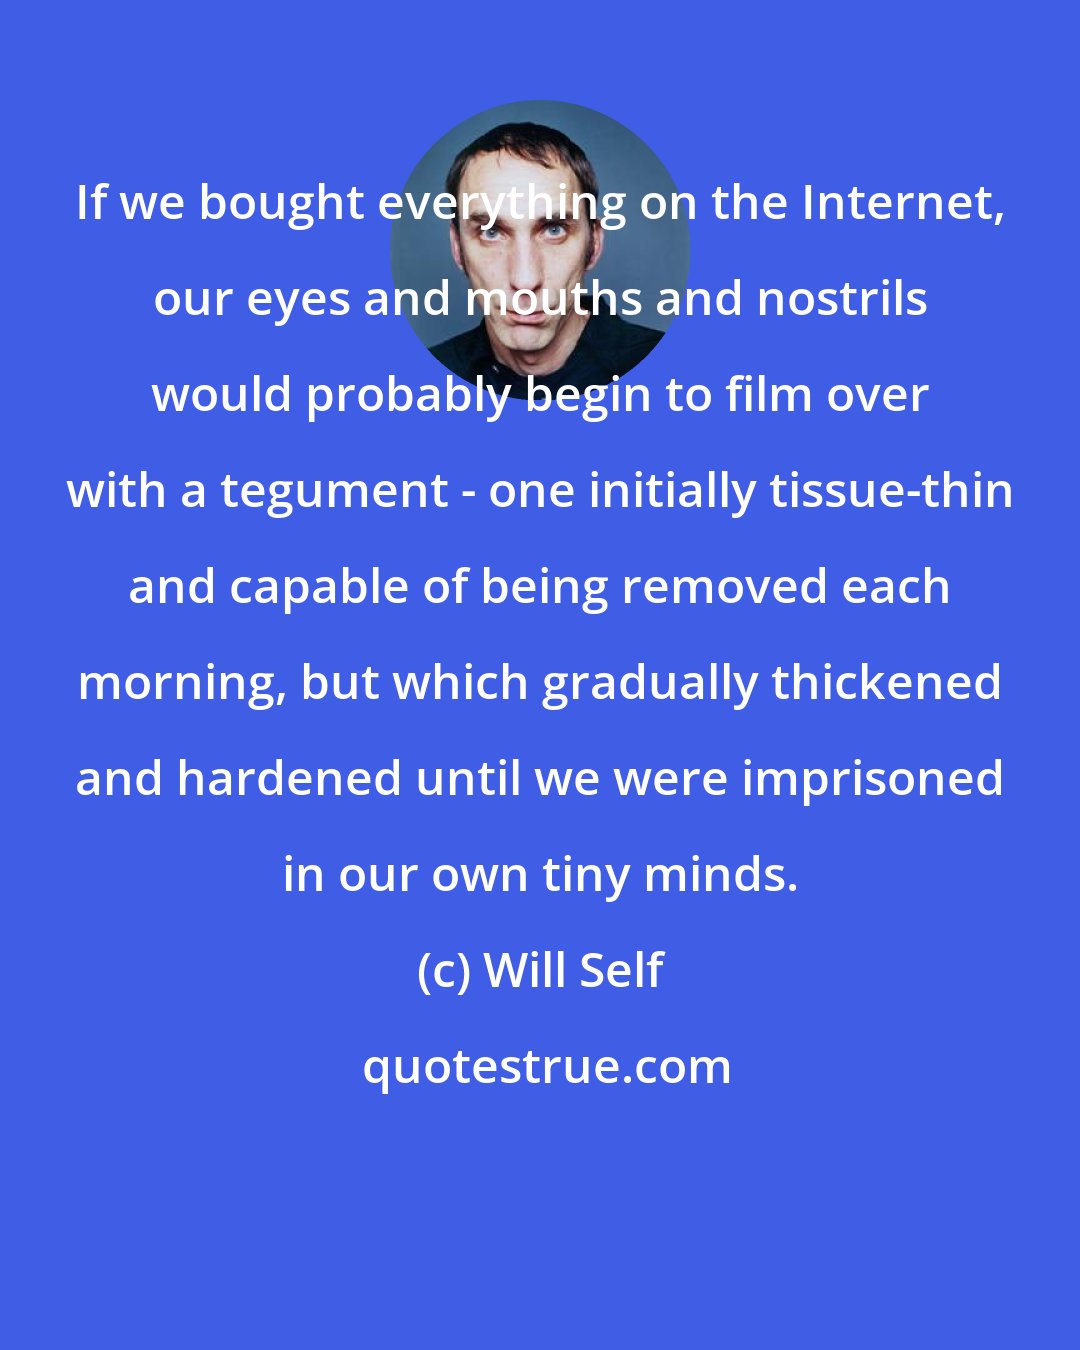 Will Self: If we bought everything on the Internet, our eyes and mouths and nostrils would probably begin to film over with a tegument - one initially tissue-thin and capable of being removed each morning, but which gradually thickened and hardened until we were imprisoned in our own tiny minds.